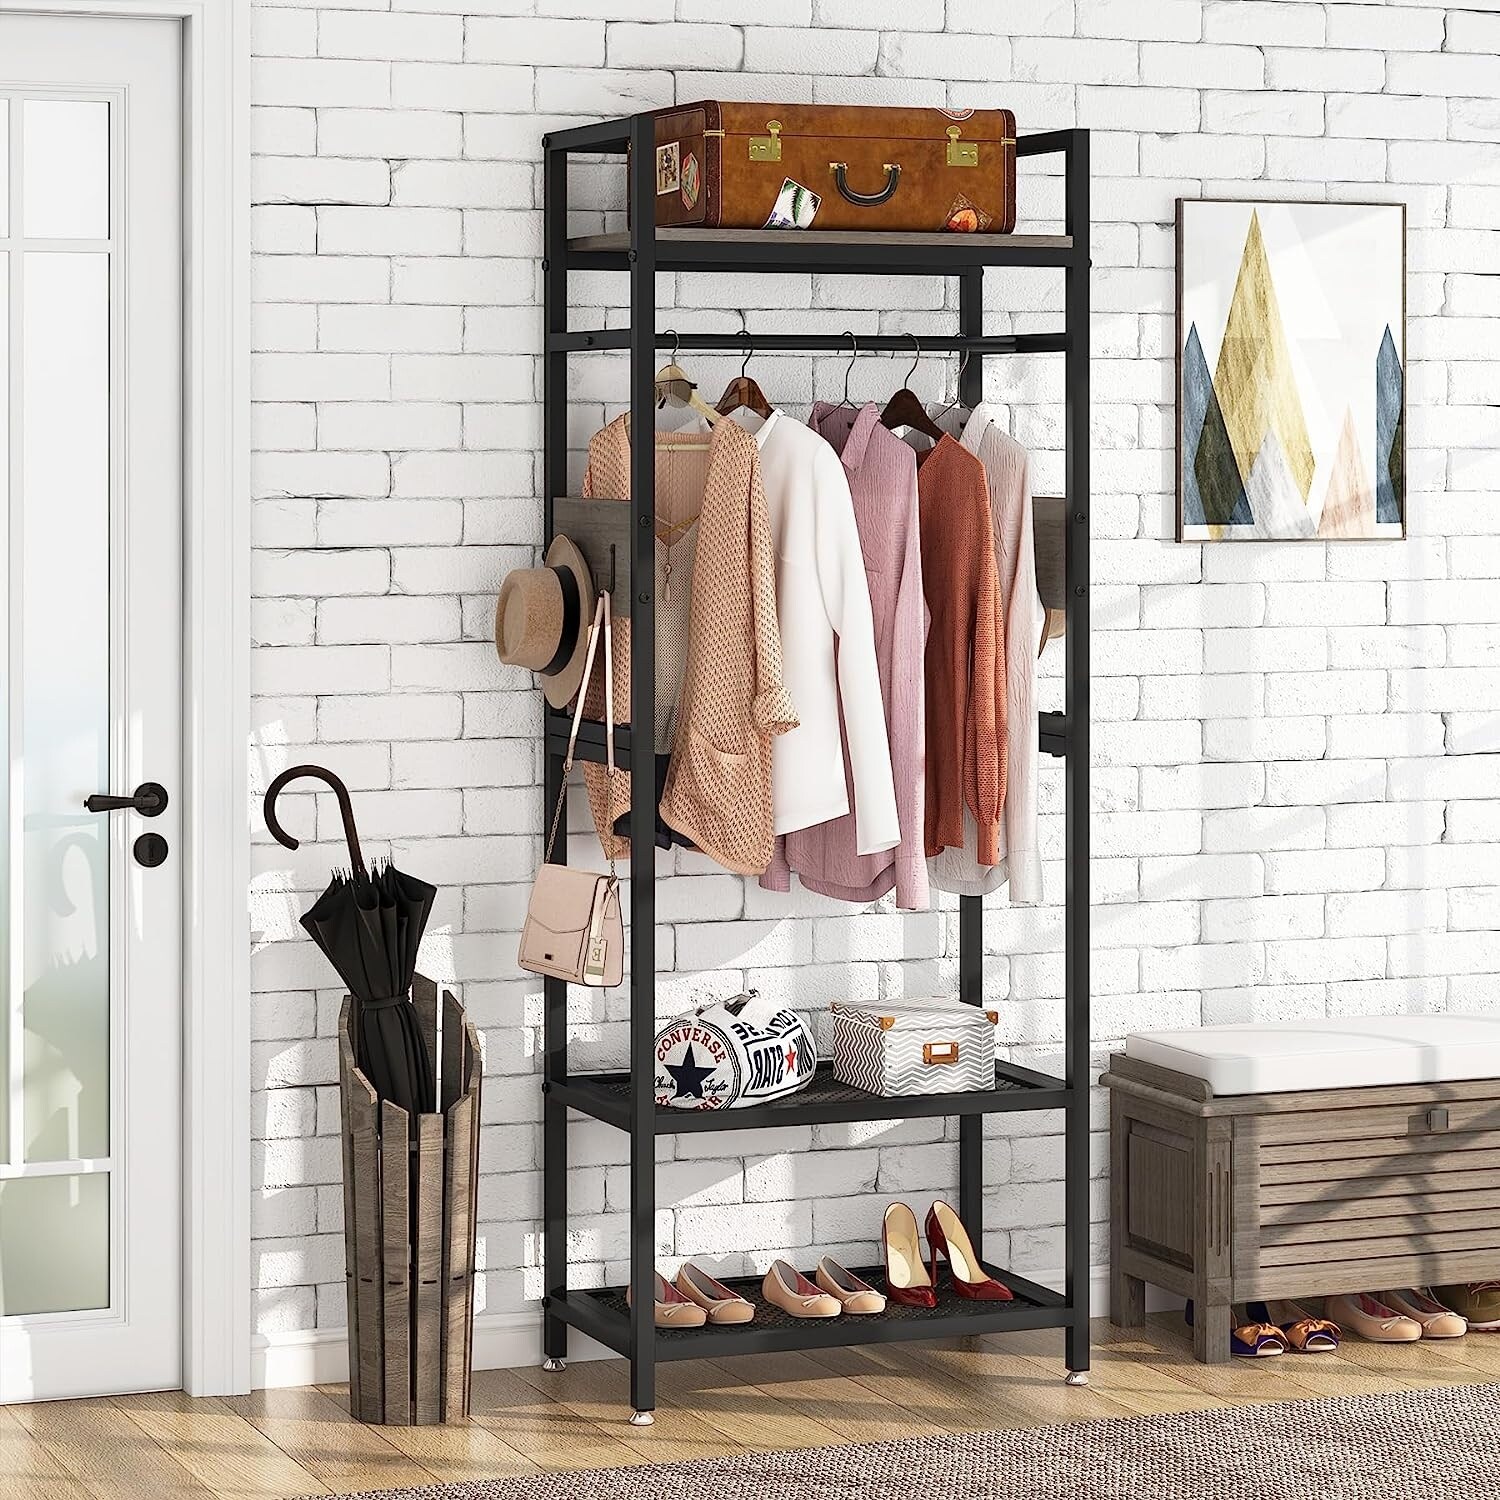 https://ak1.ostkcdn.com/images/products/is/images/direct/0c24b4d7e6370ee7689f746260a0aa3444a8be7b/Industrial-Clothing-rack-with-shelves%2C-Small-Clothes-rack-Hall-Tree%2Cfreestanding-closet-organizer.jpg